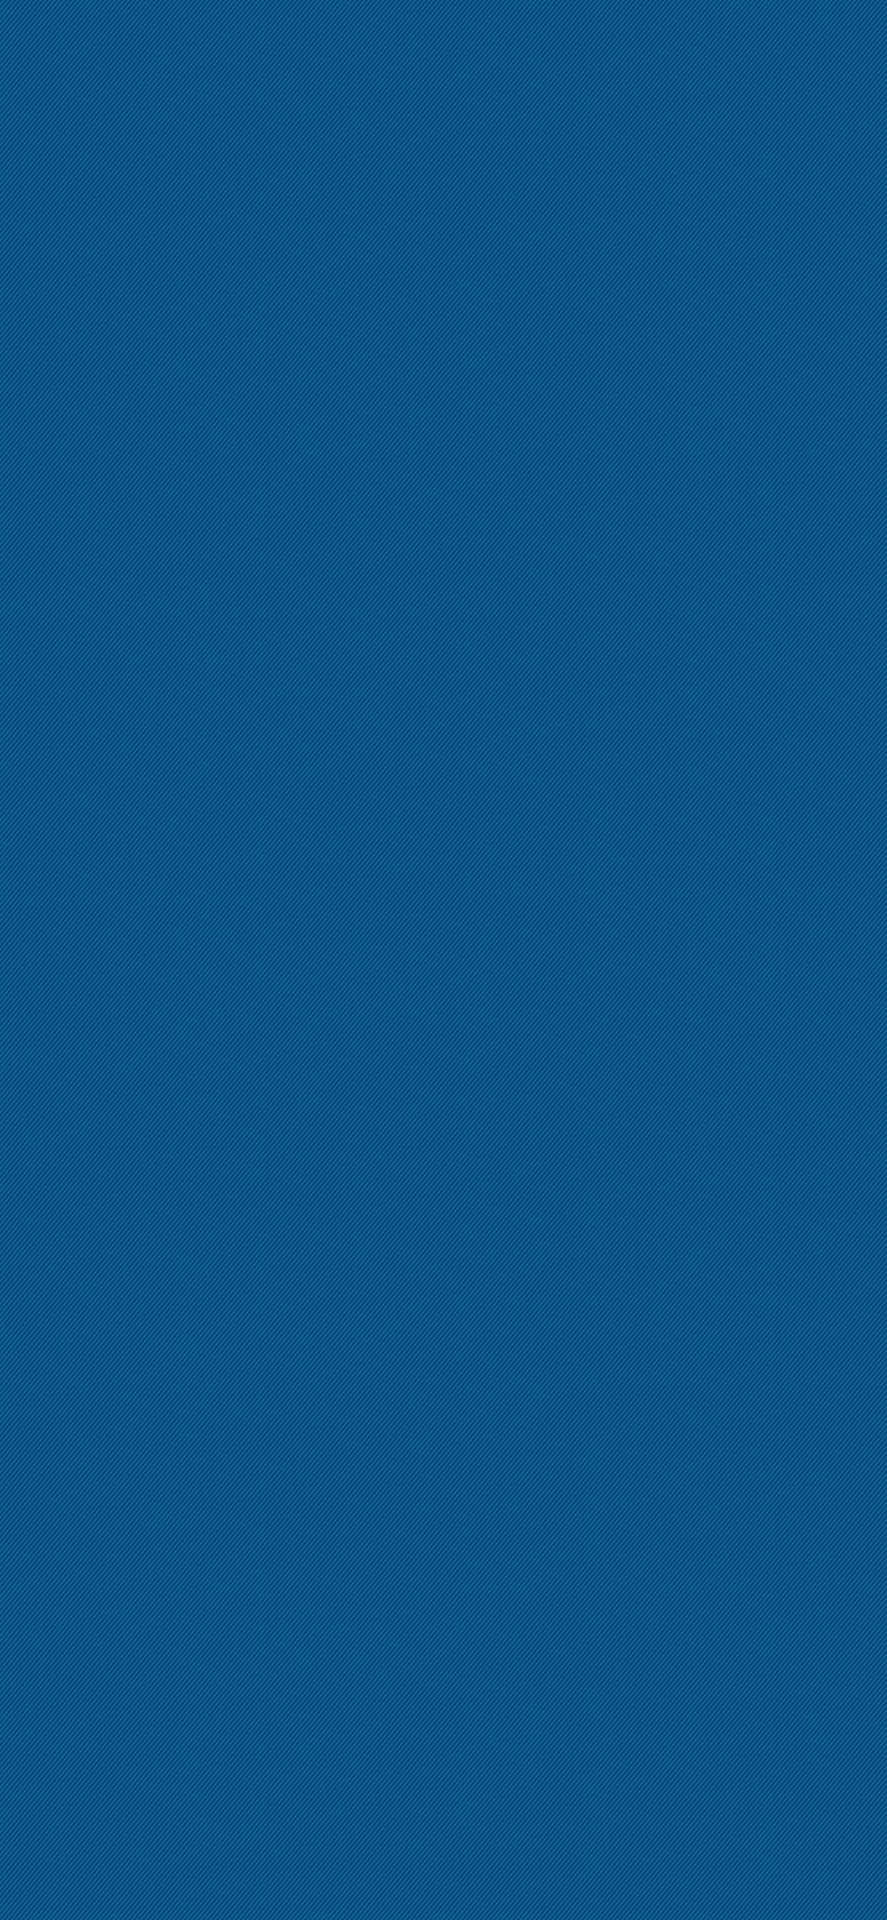 A Blue Background With A White Arrow